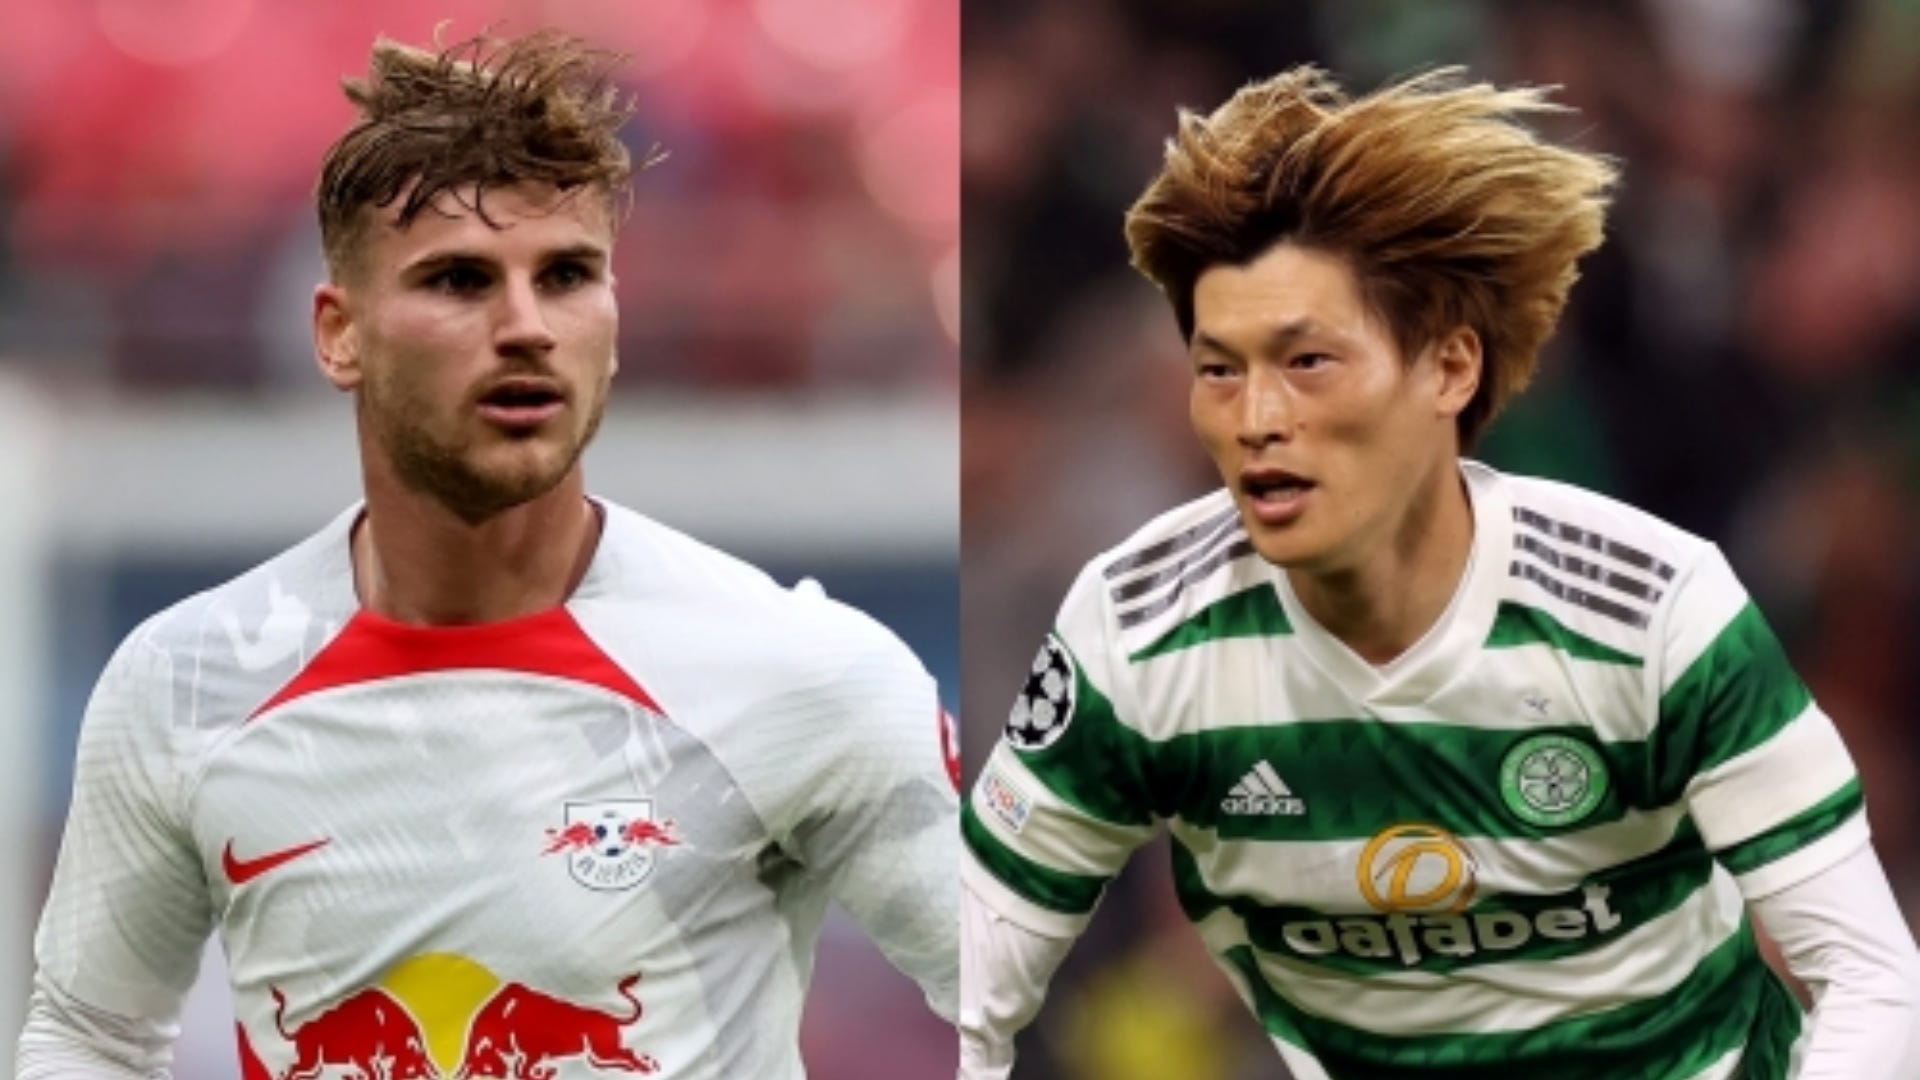 RB Leipzig vs Celtic: Live stream, TV channel, kick-off time & where to watch | Goal.com UK